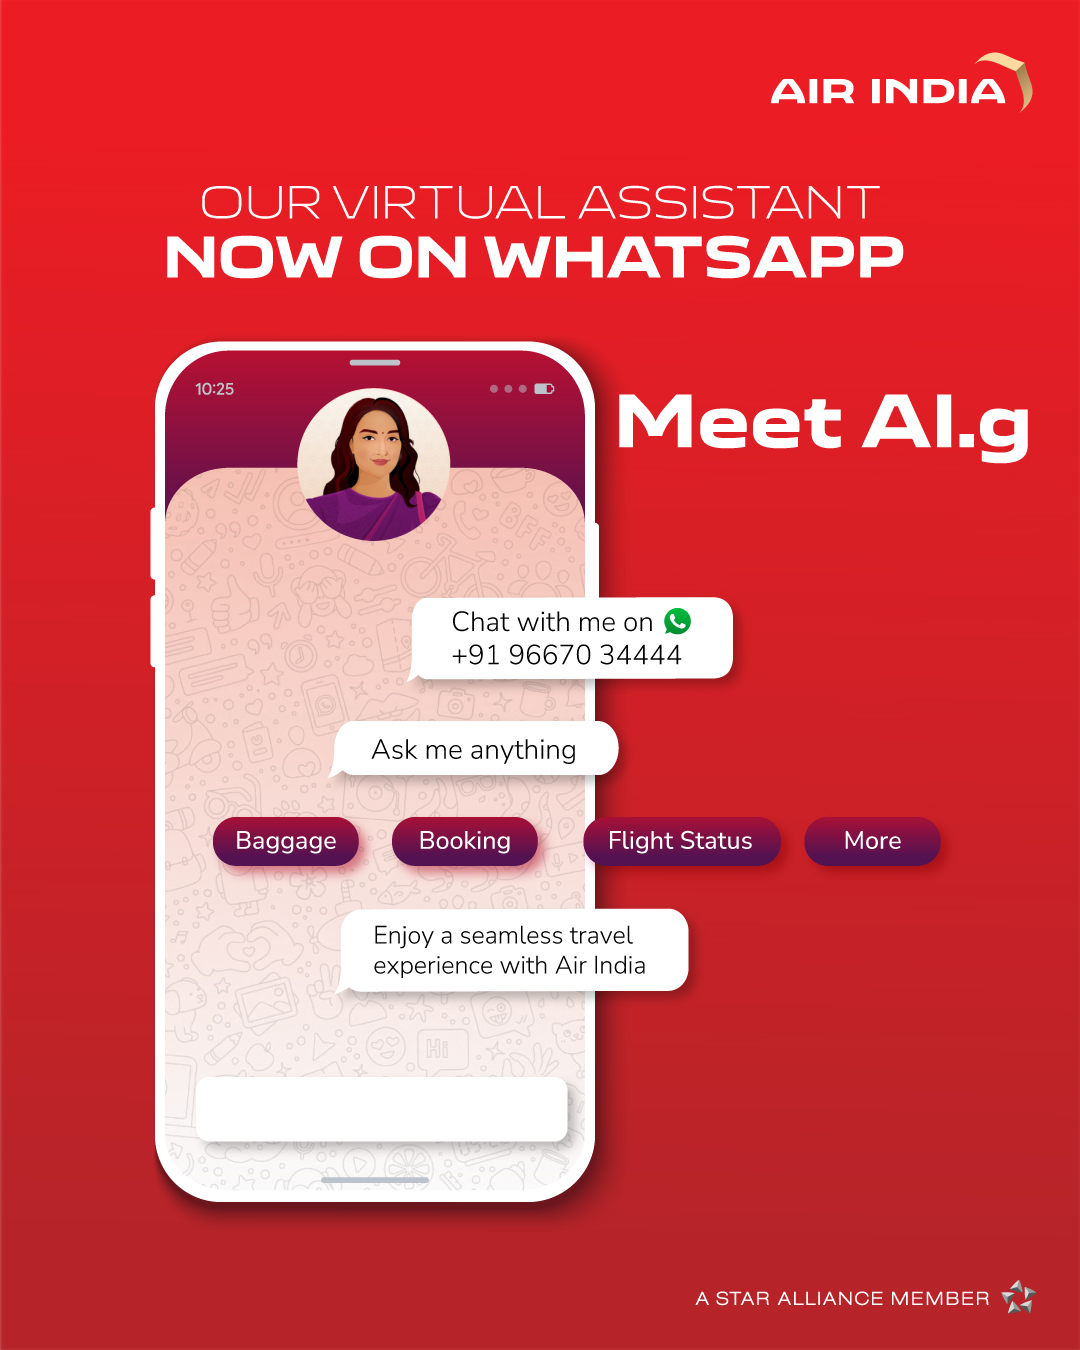 Air India introduces AI.g, a generative AI-powered virtual travel assistant on WhatsApp